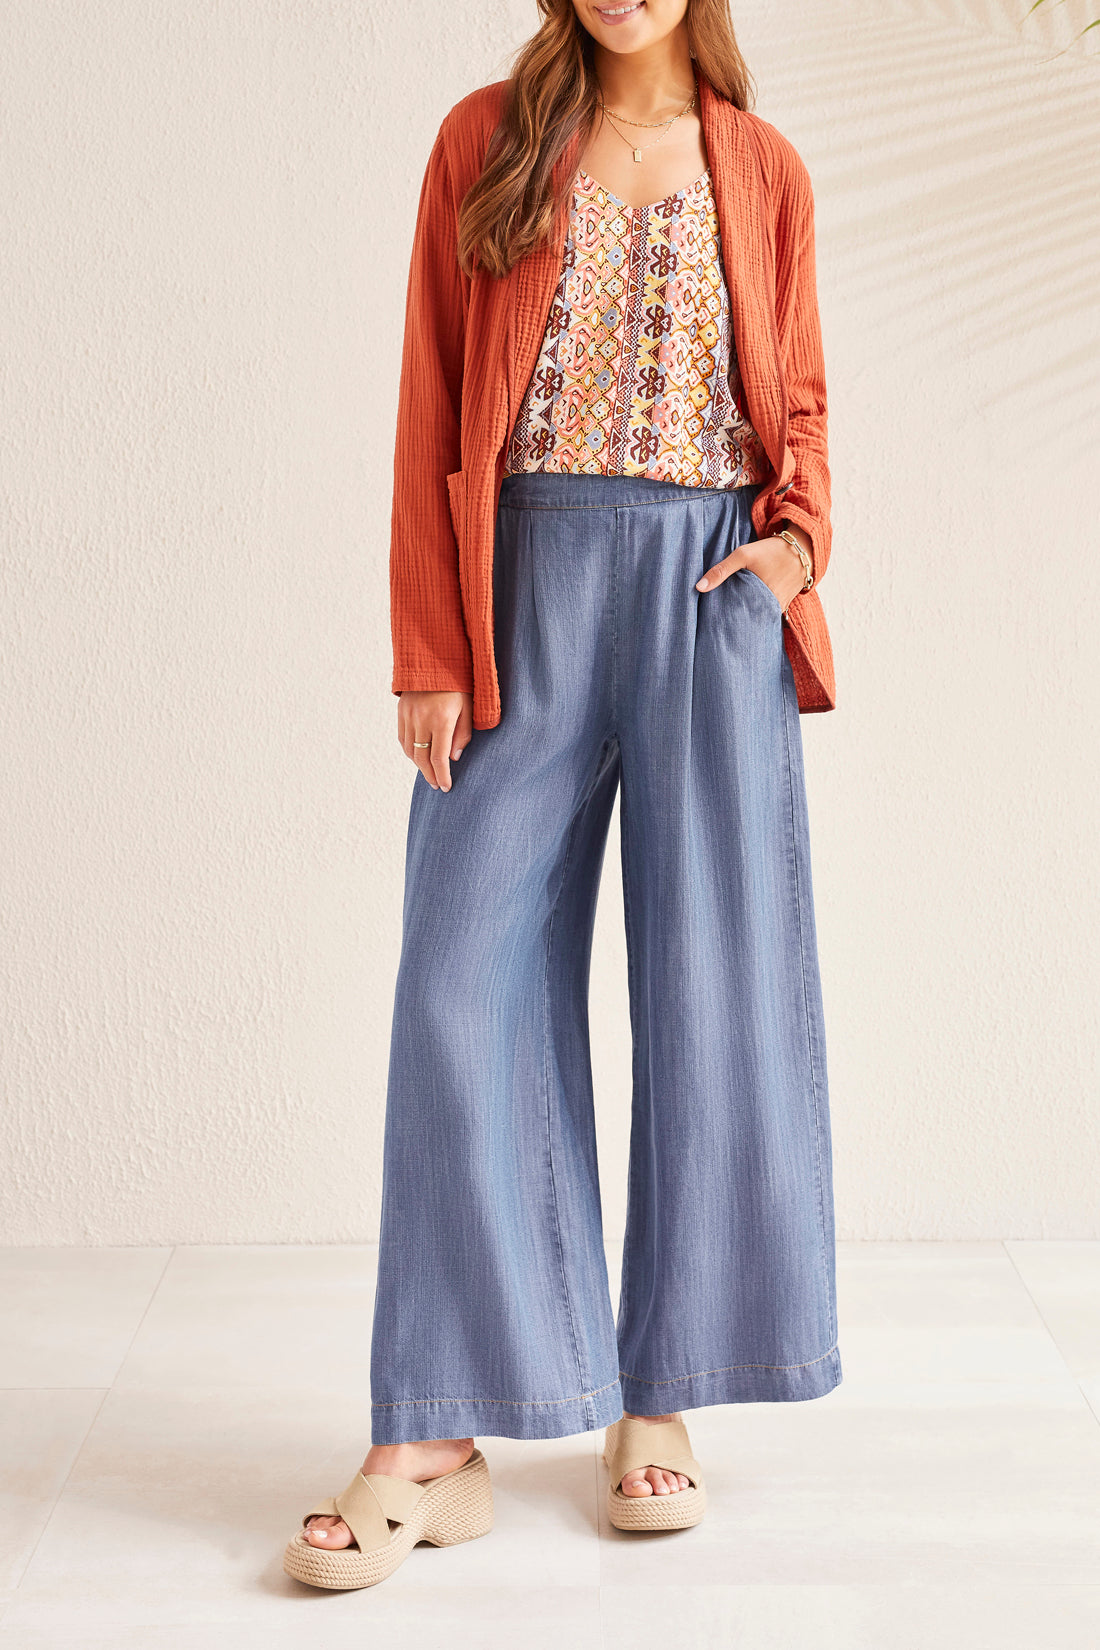 Shop the Flowy Pull on Wide Leg Pant with Pockets - Strike The Pose